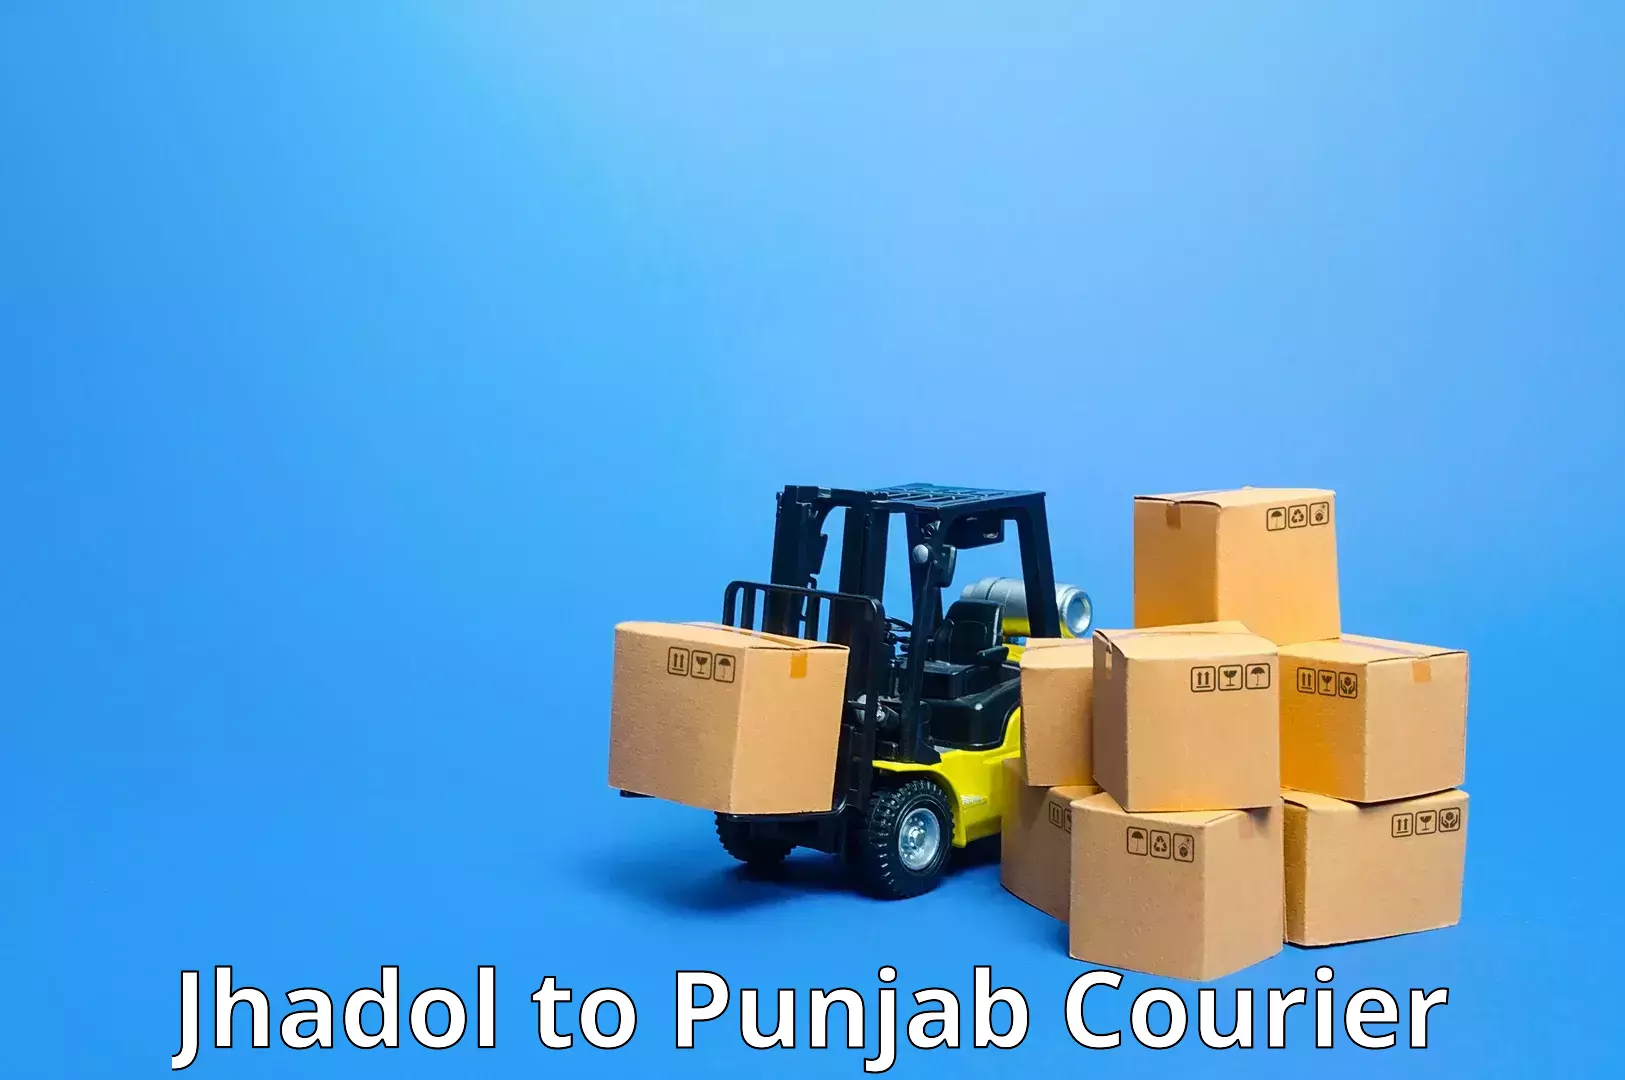 Nationwide delivery network Jhadol to Punjab